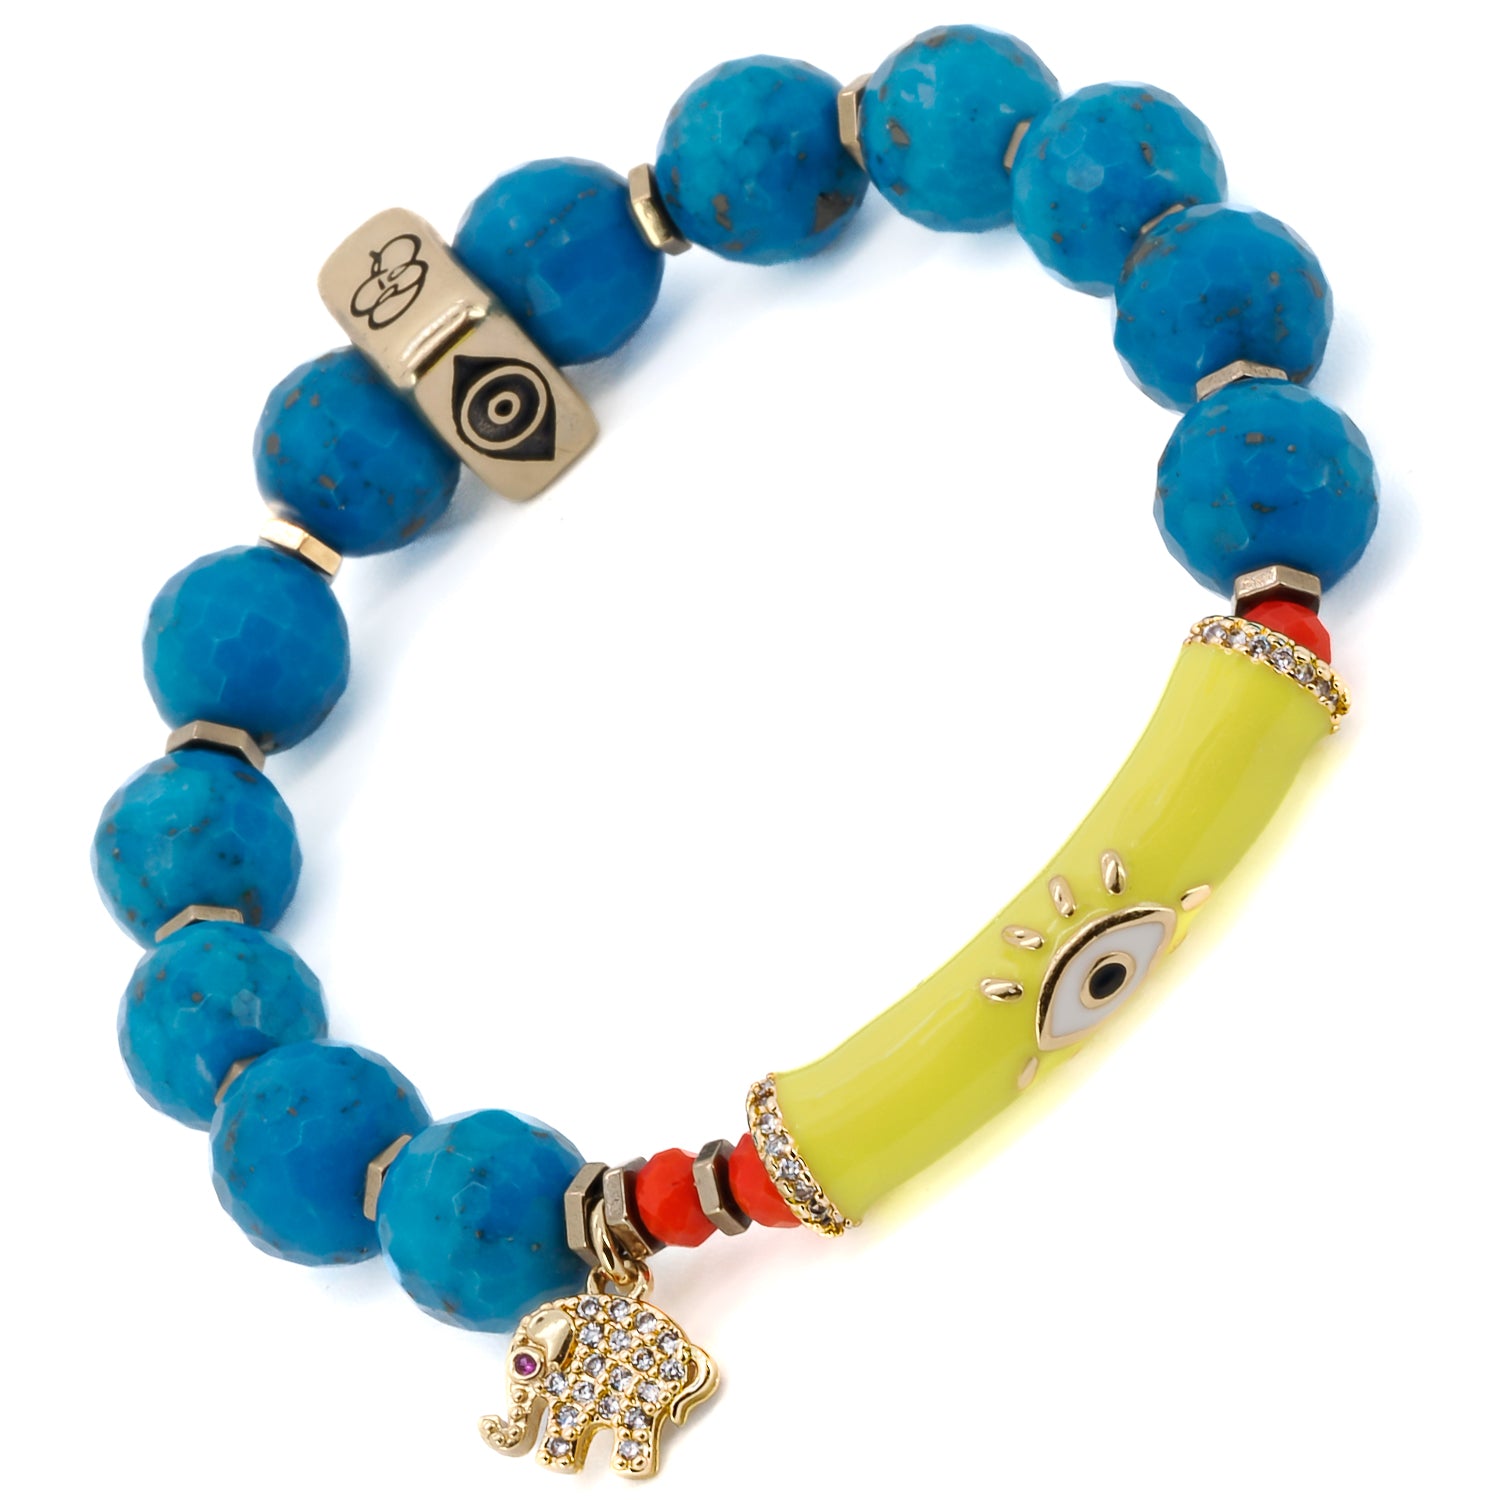 Discover the healing properties of turquoise with the Turquoise Unique Protection Bracelet, a one-of-a-kind piece of handmade jewelry.